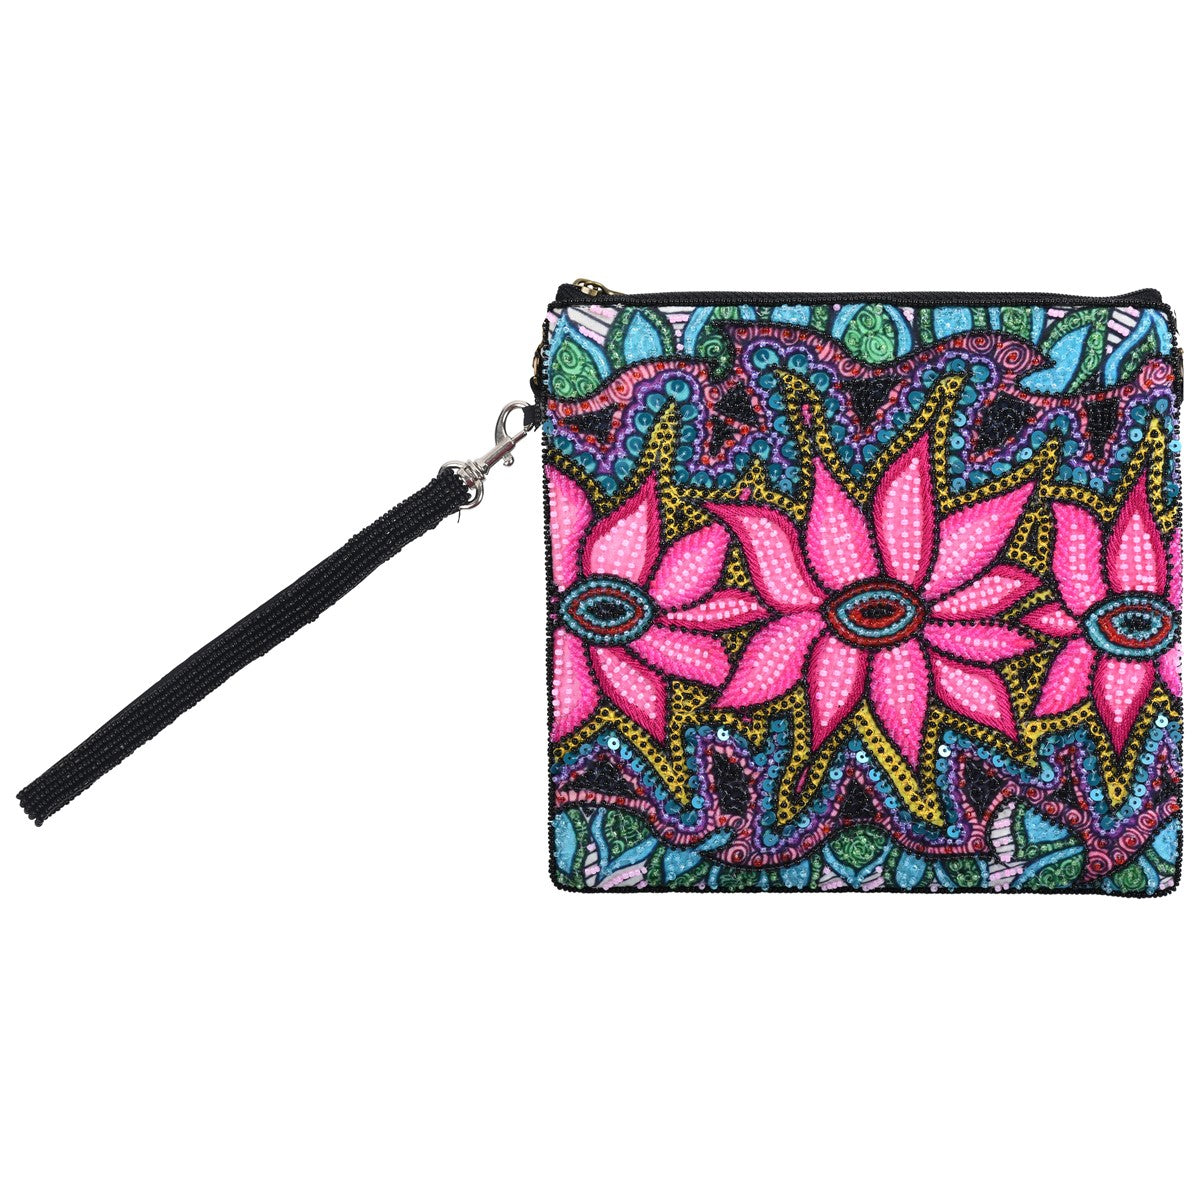 Bloom Square Clutch by Sarah Walters